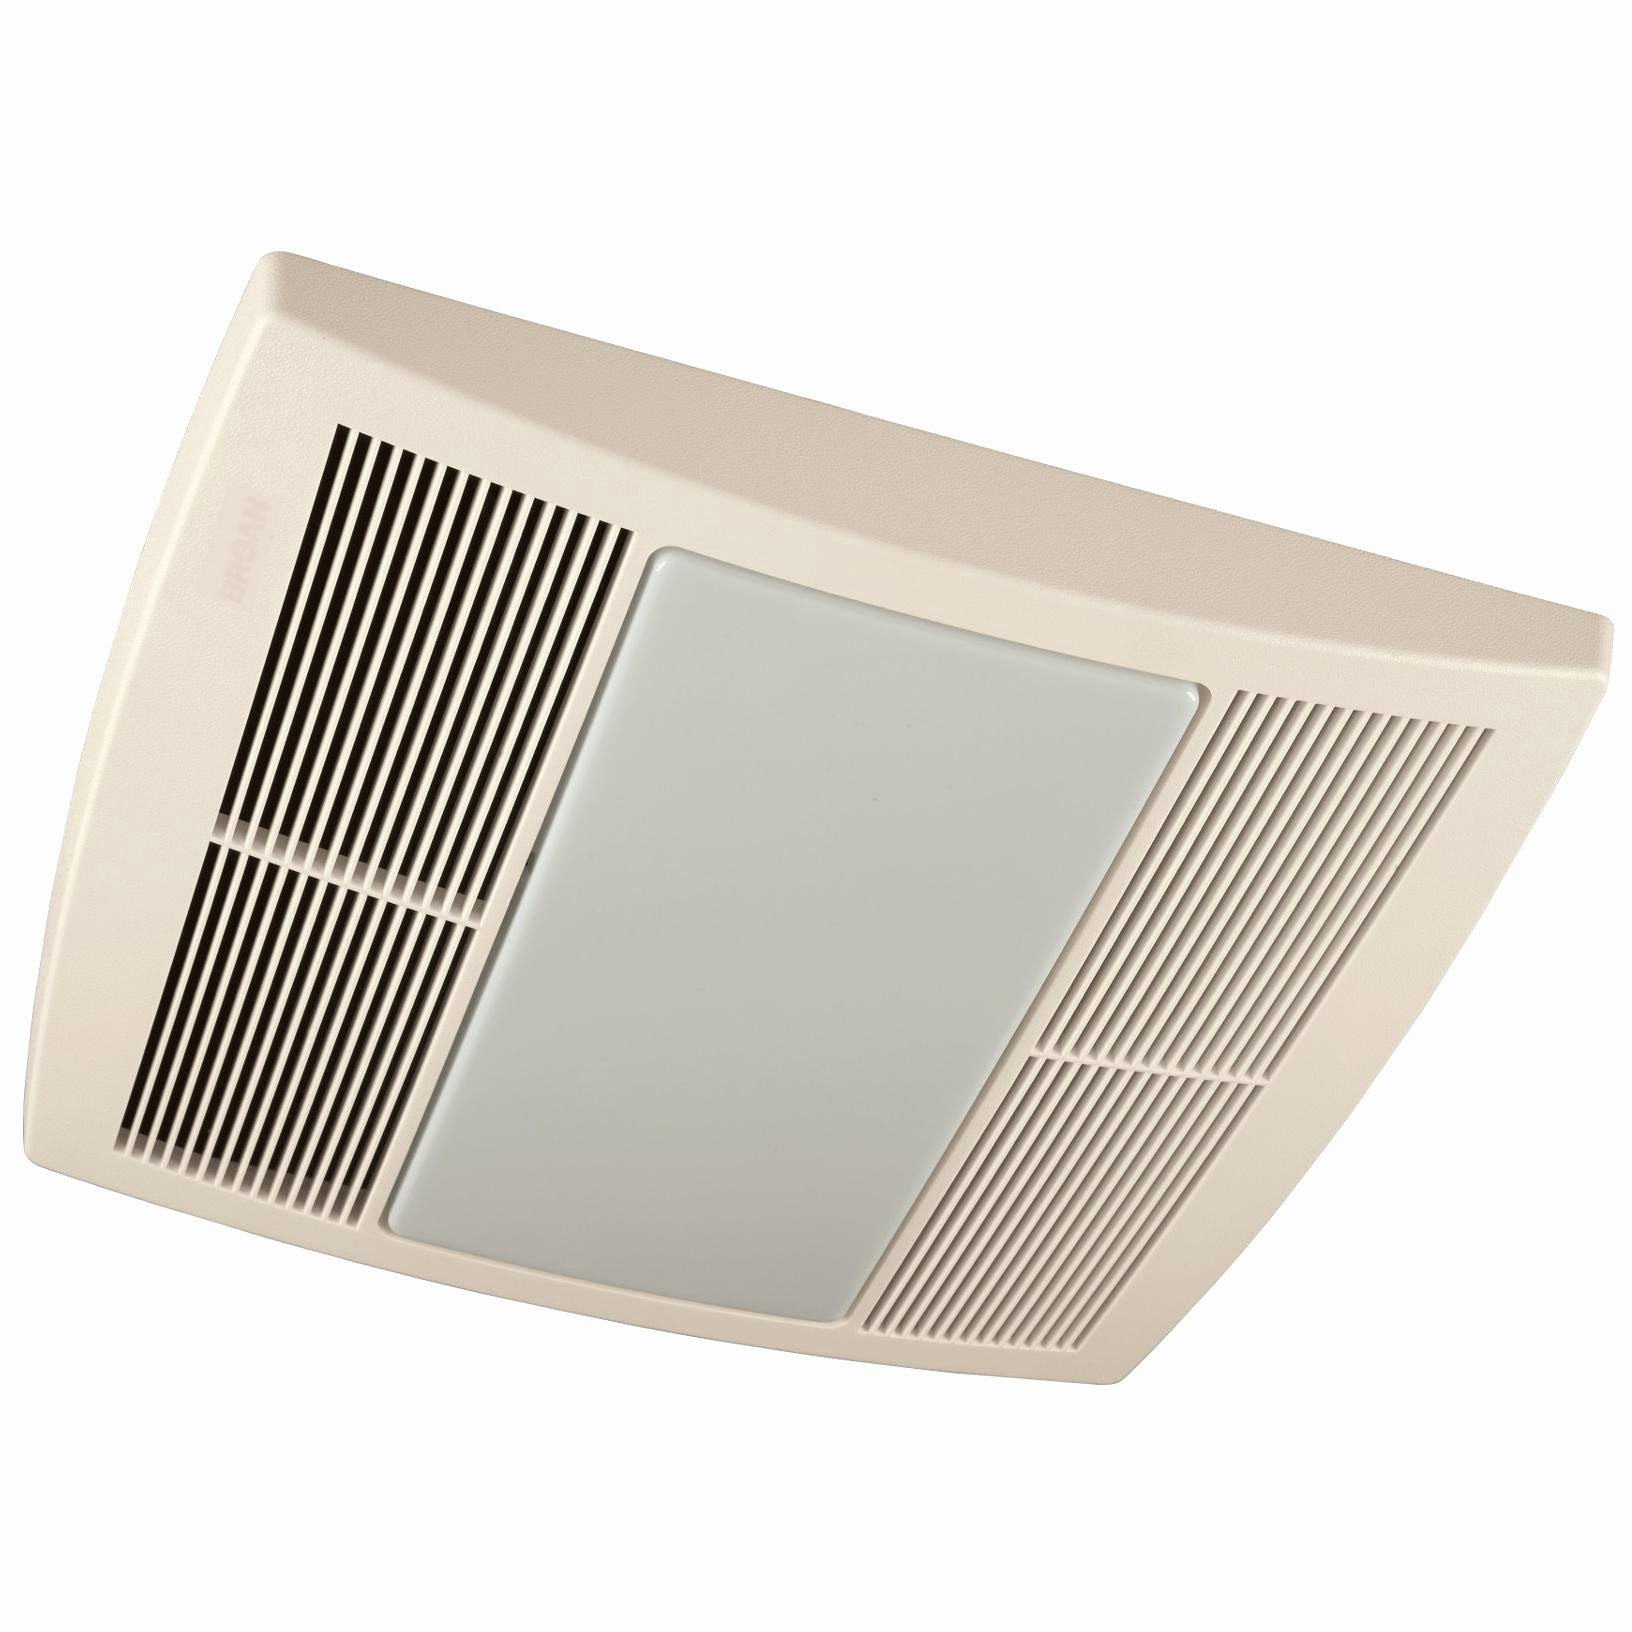 Bathroom Exhaust Fan Cover Replacement
 Bathroom Exhaust Fan And Light Bathroom Exhaust Fan And